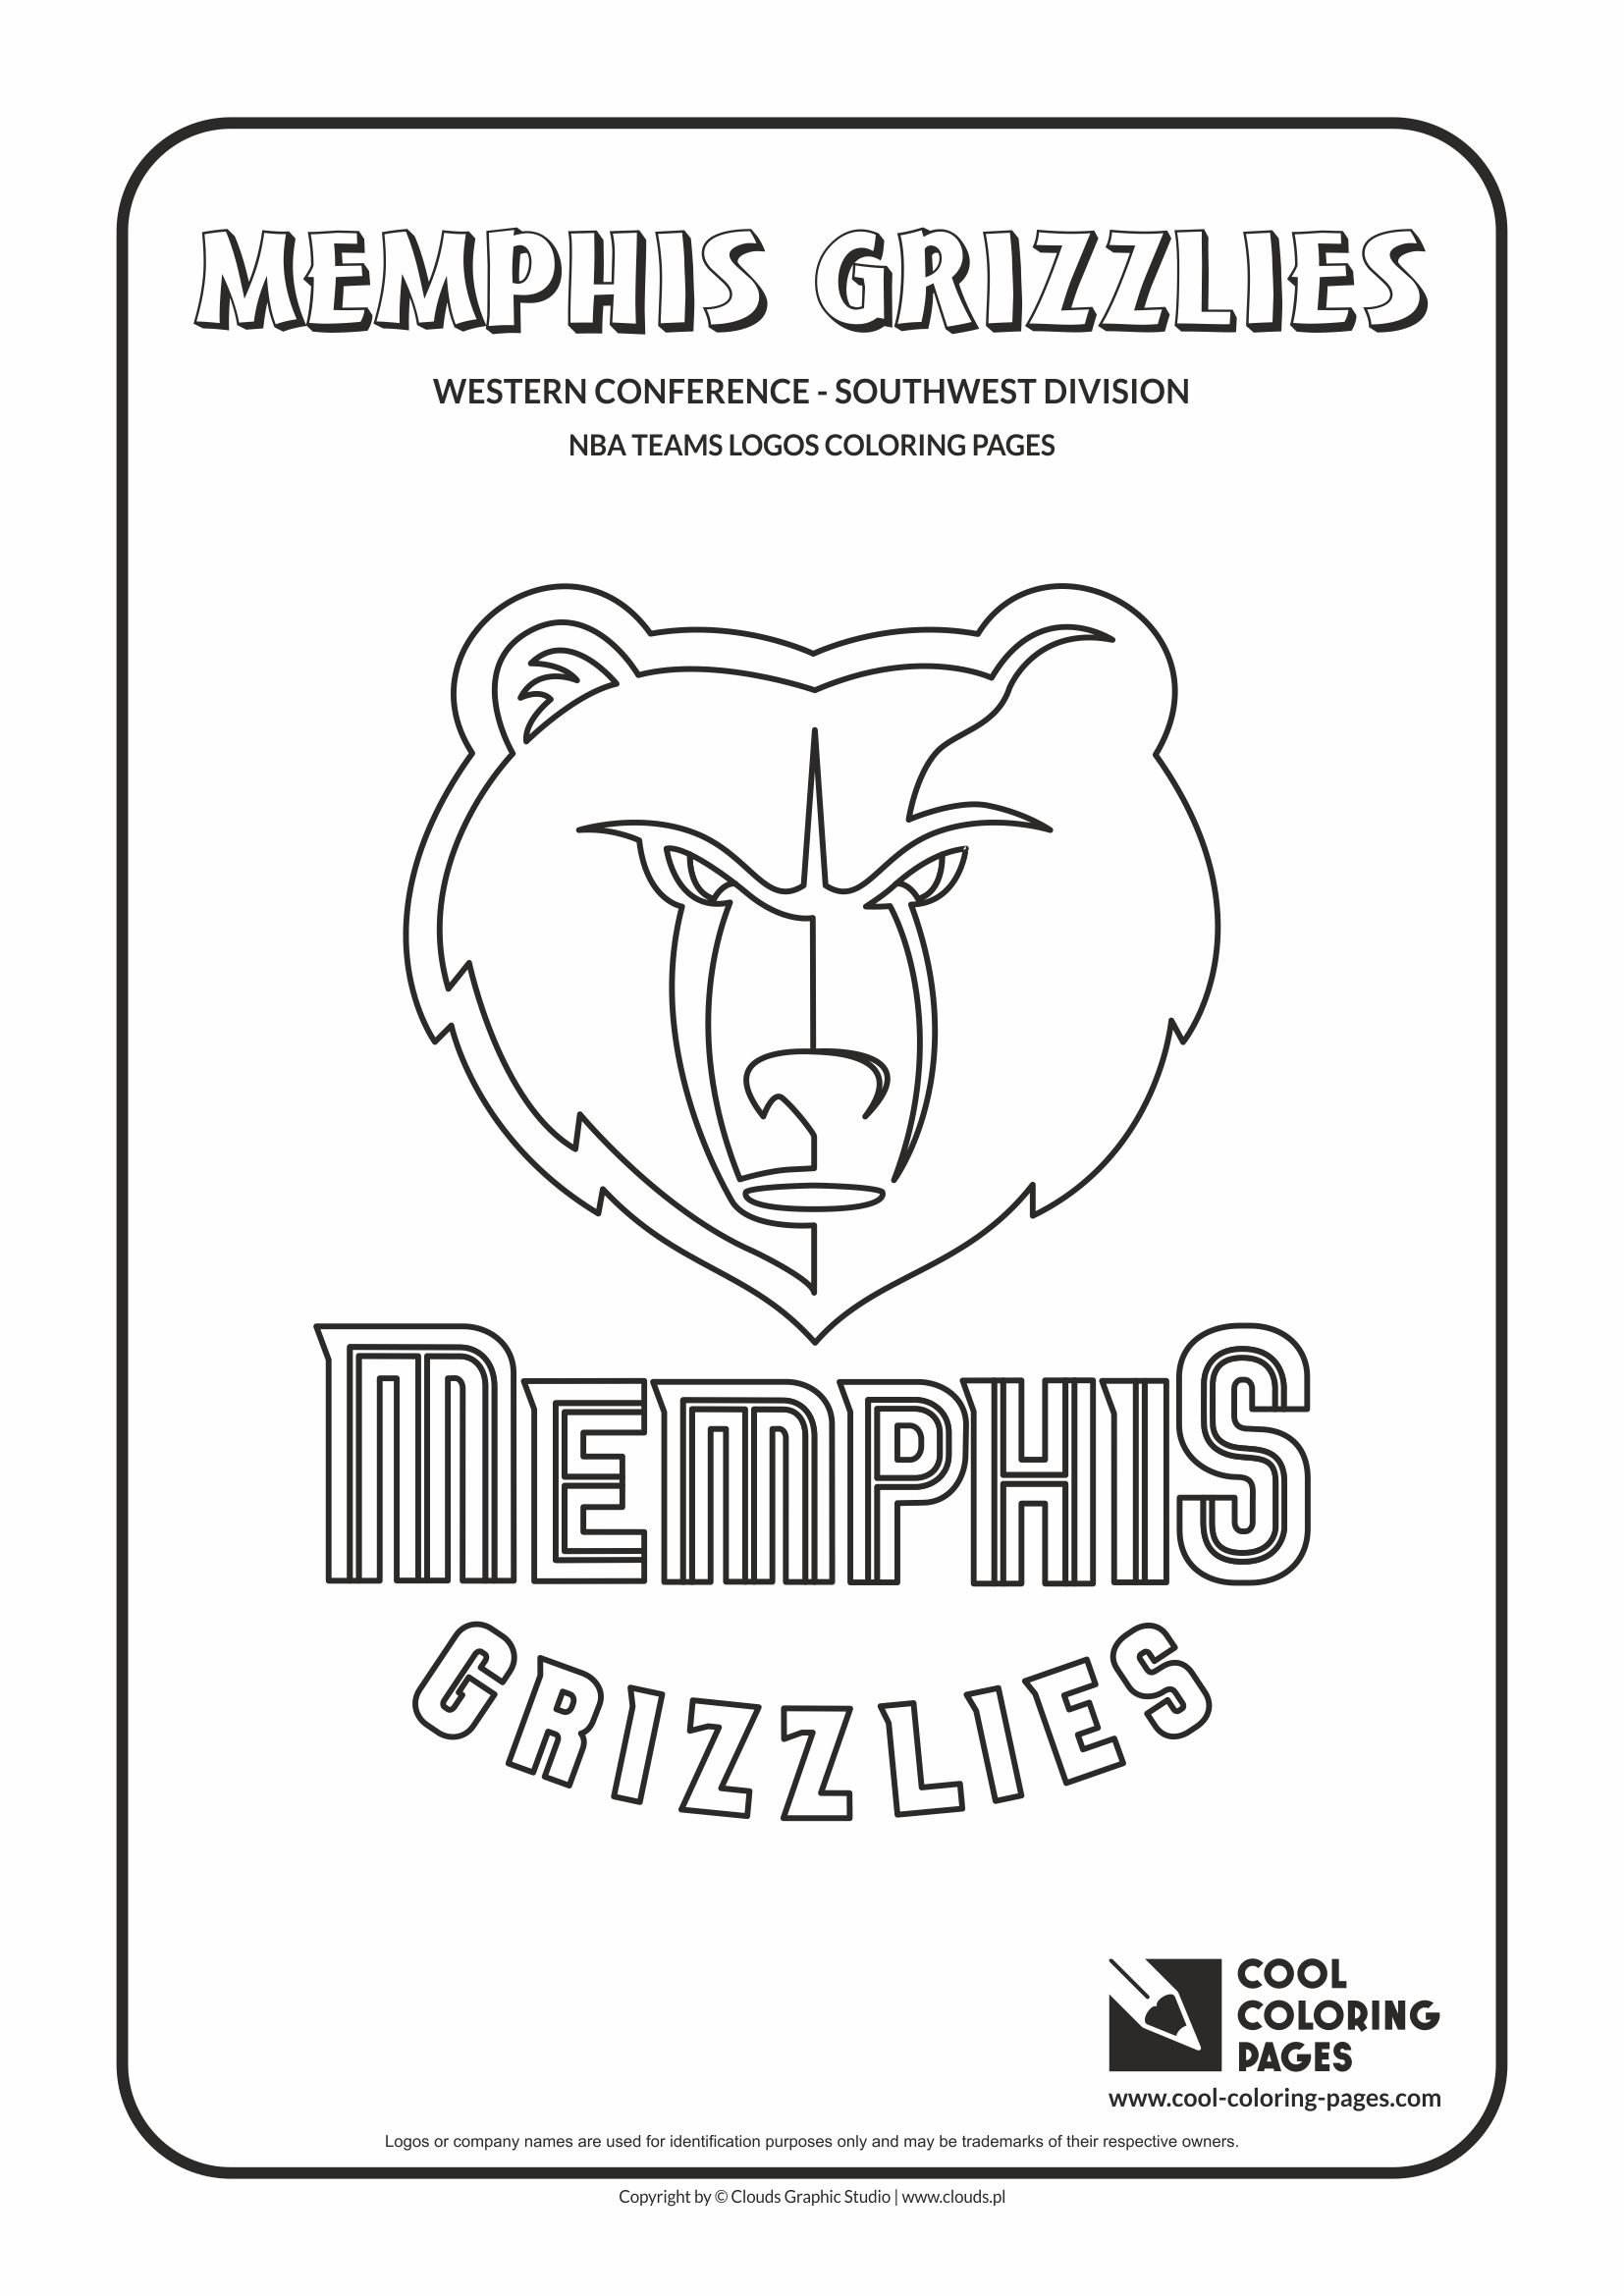 NBA Basketball Trophy Coloring - Get Coloring Pages